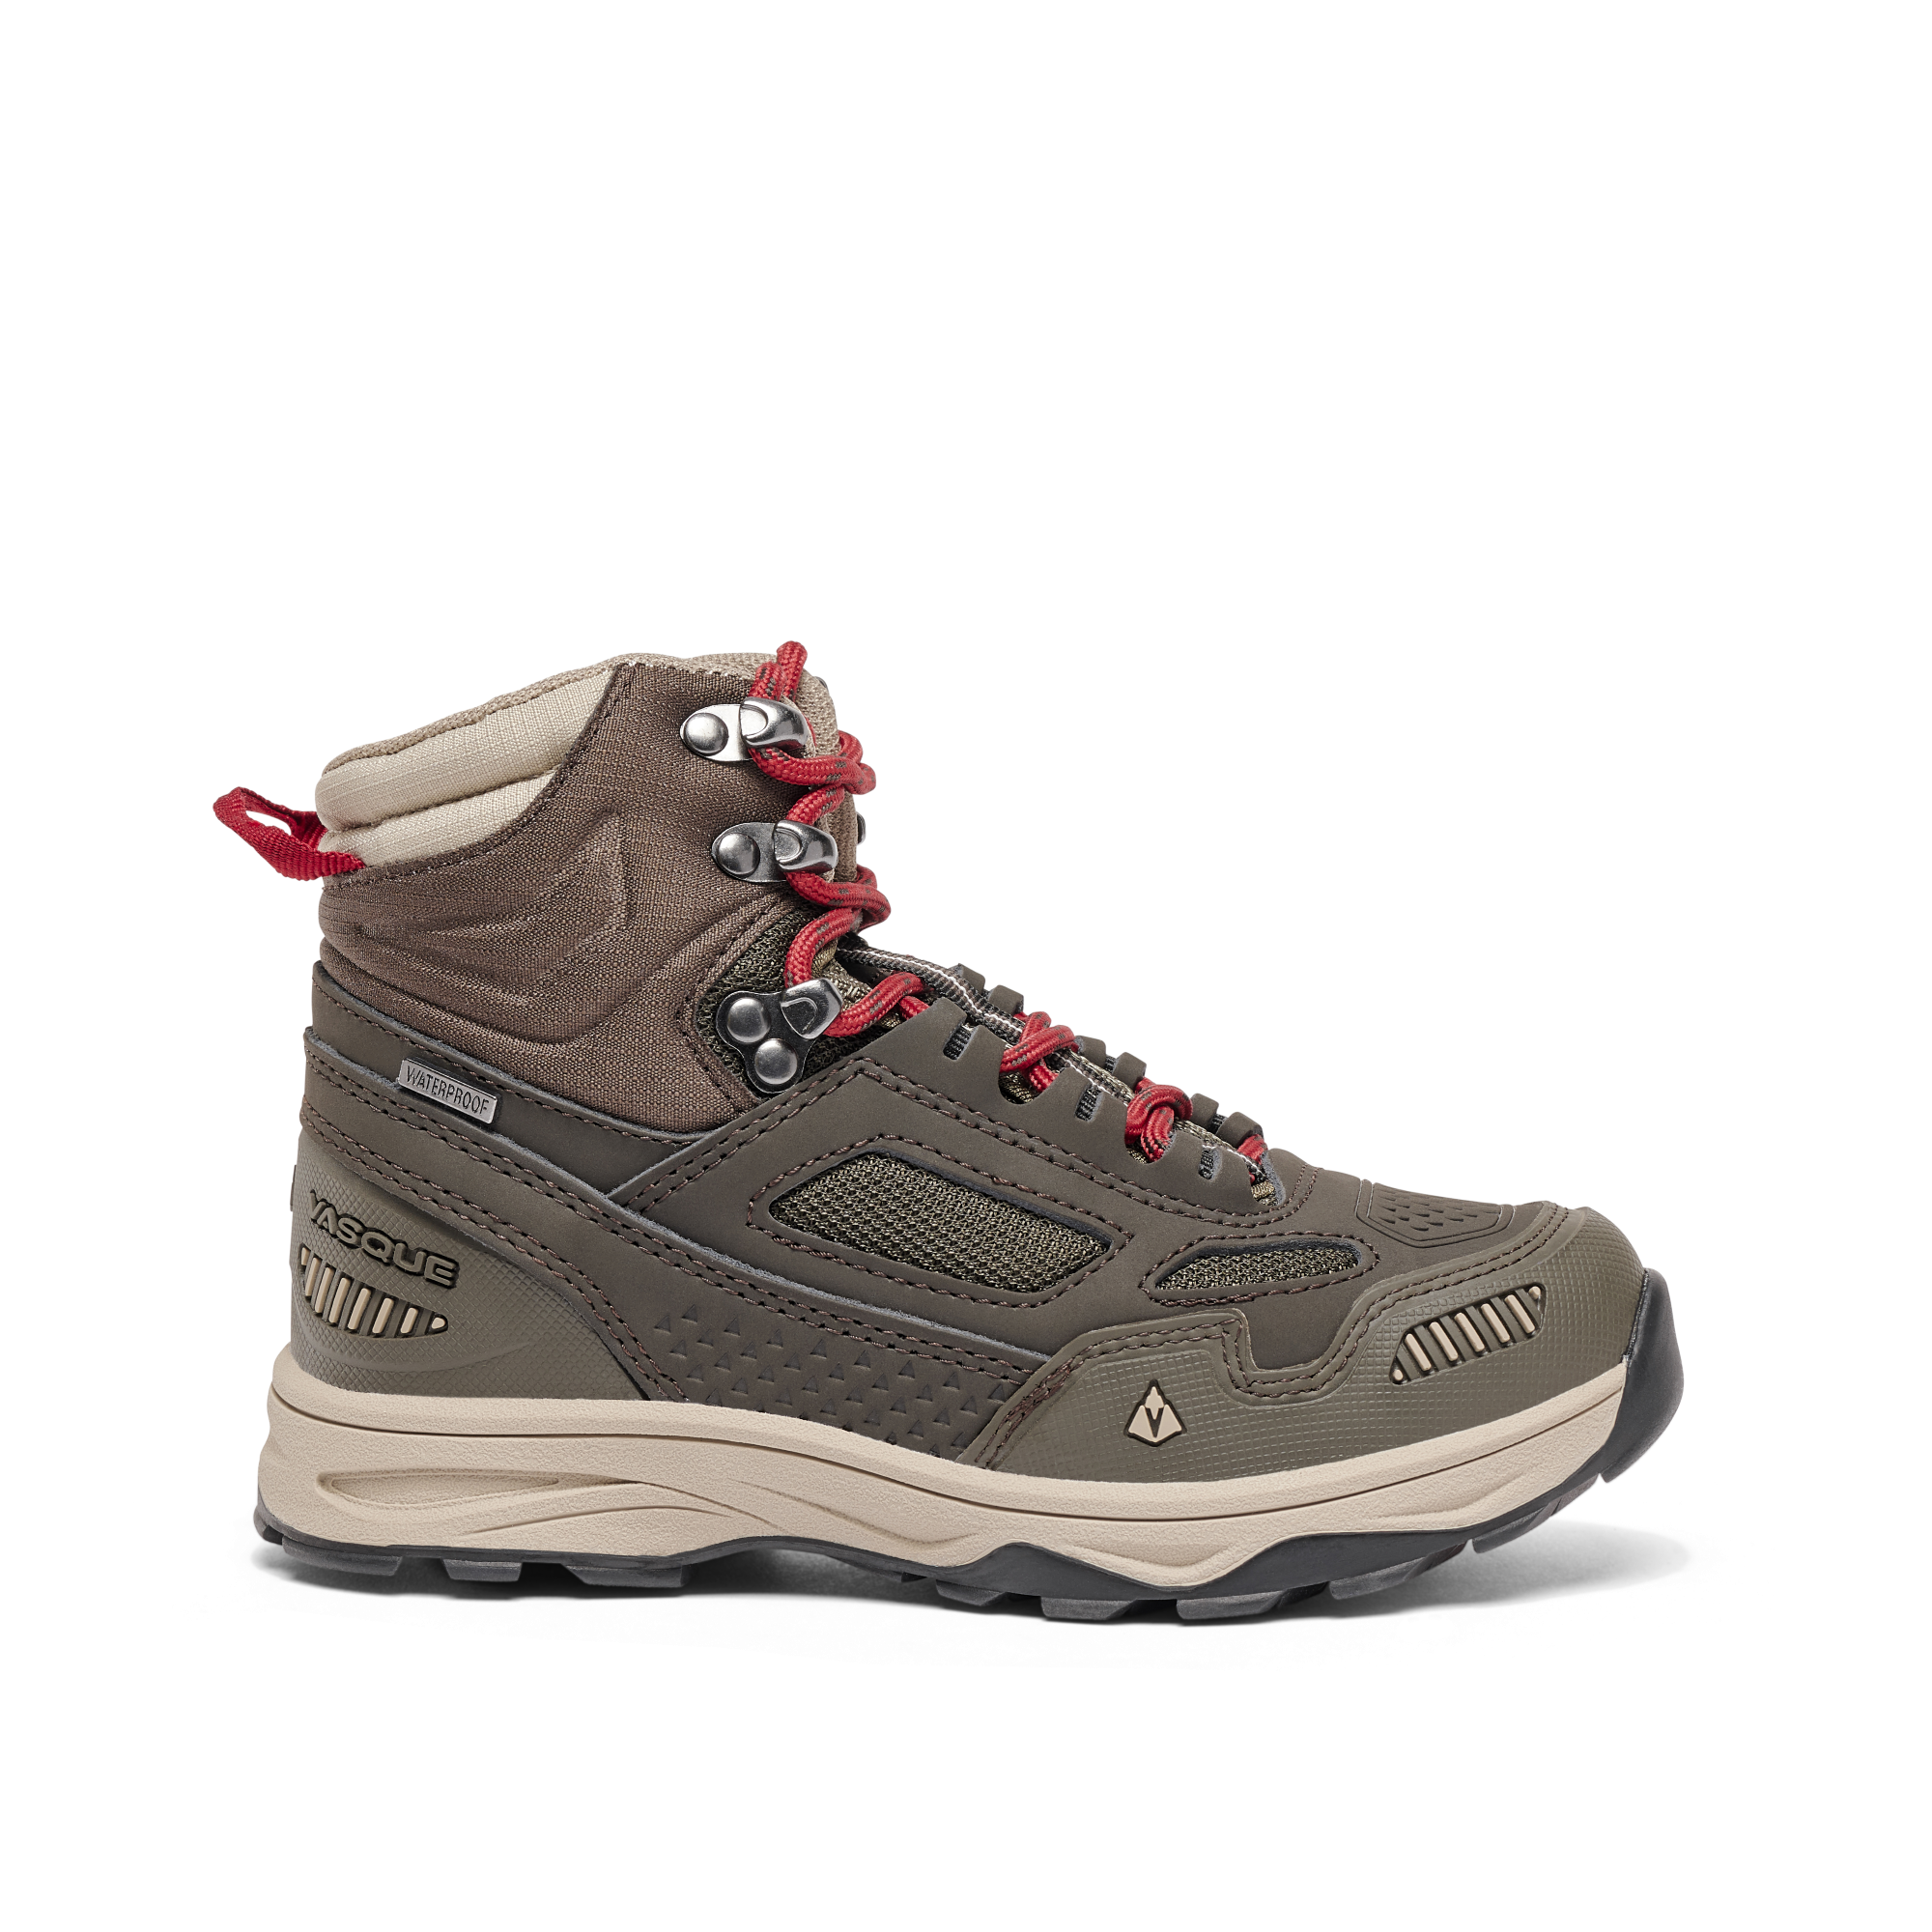 Vasque Breeze AT UltraDry Waterproof Hiking Boots for Kids - Olive - 13 Kids